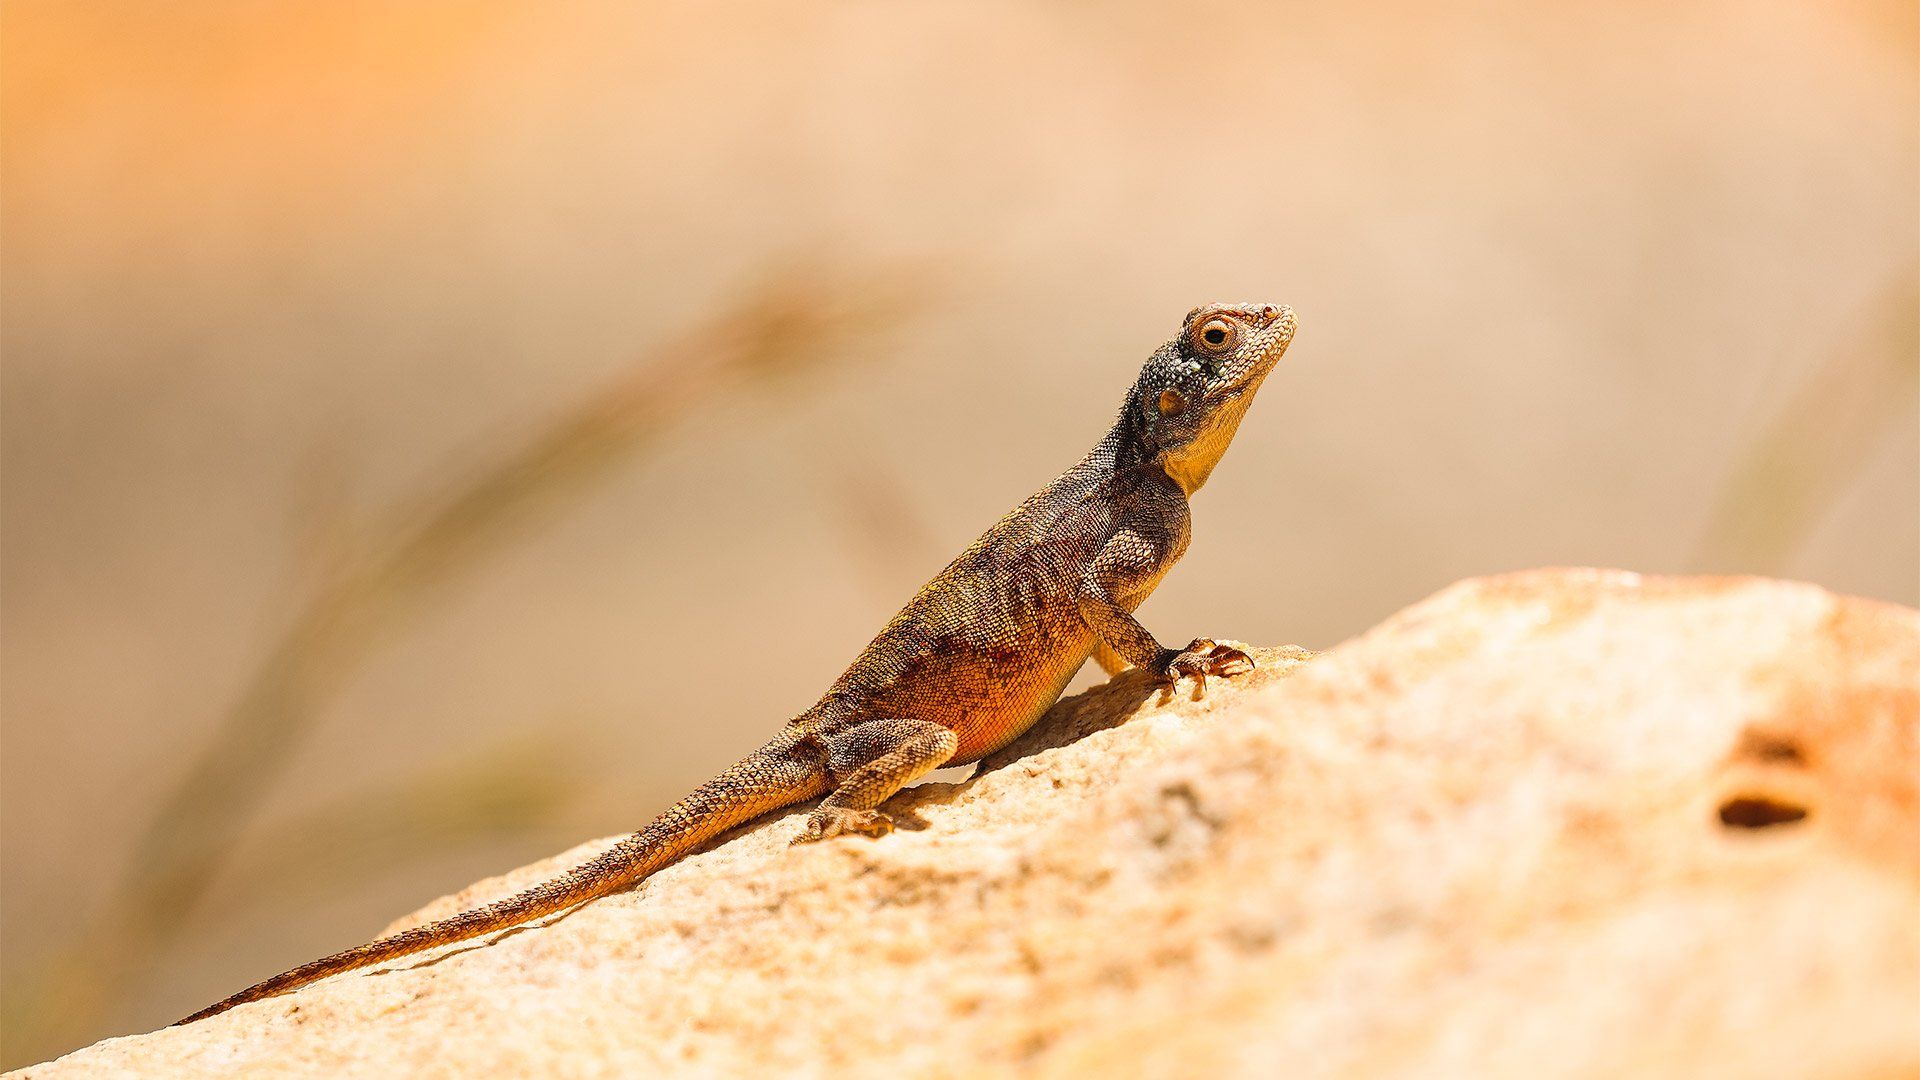 A lizard standing on a rock raises its head and upper body in the sunlight.